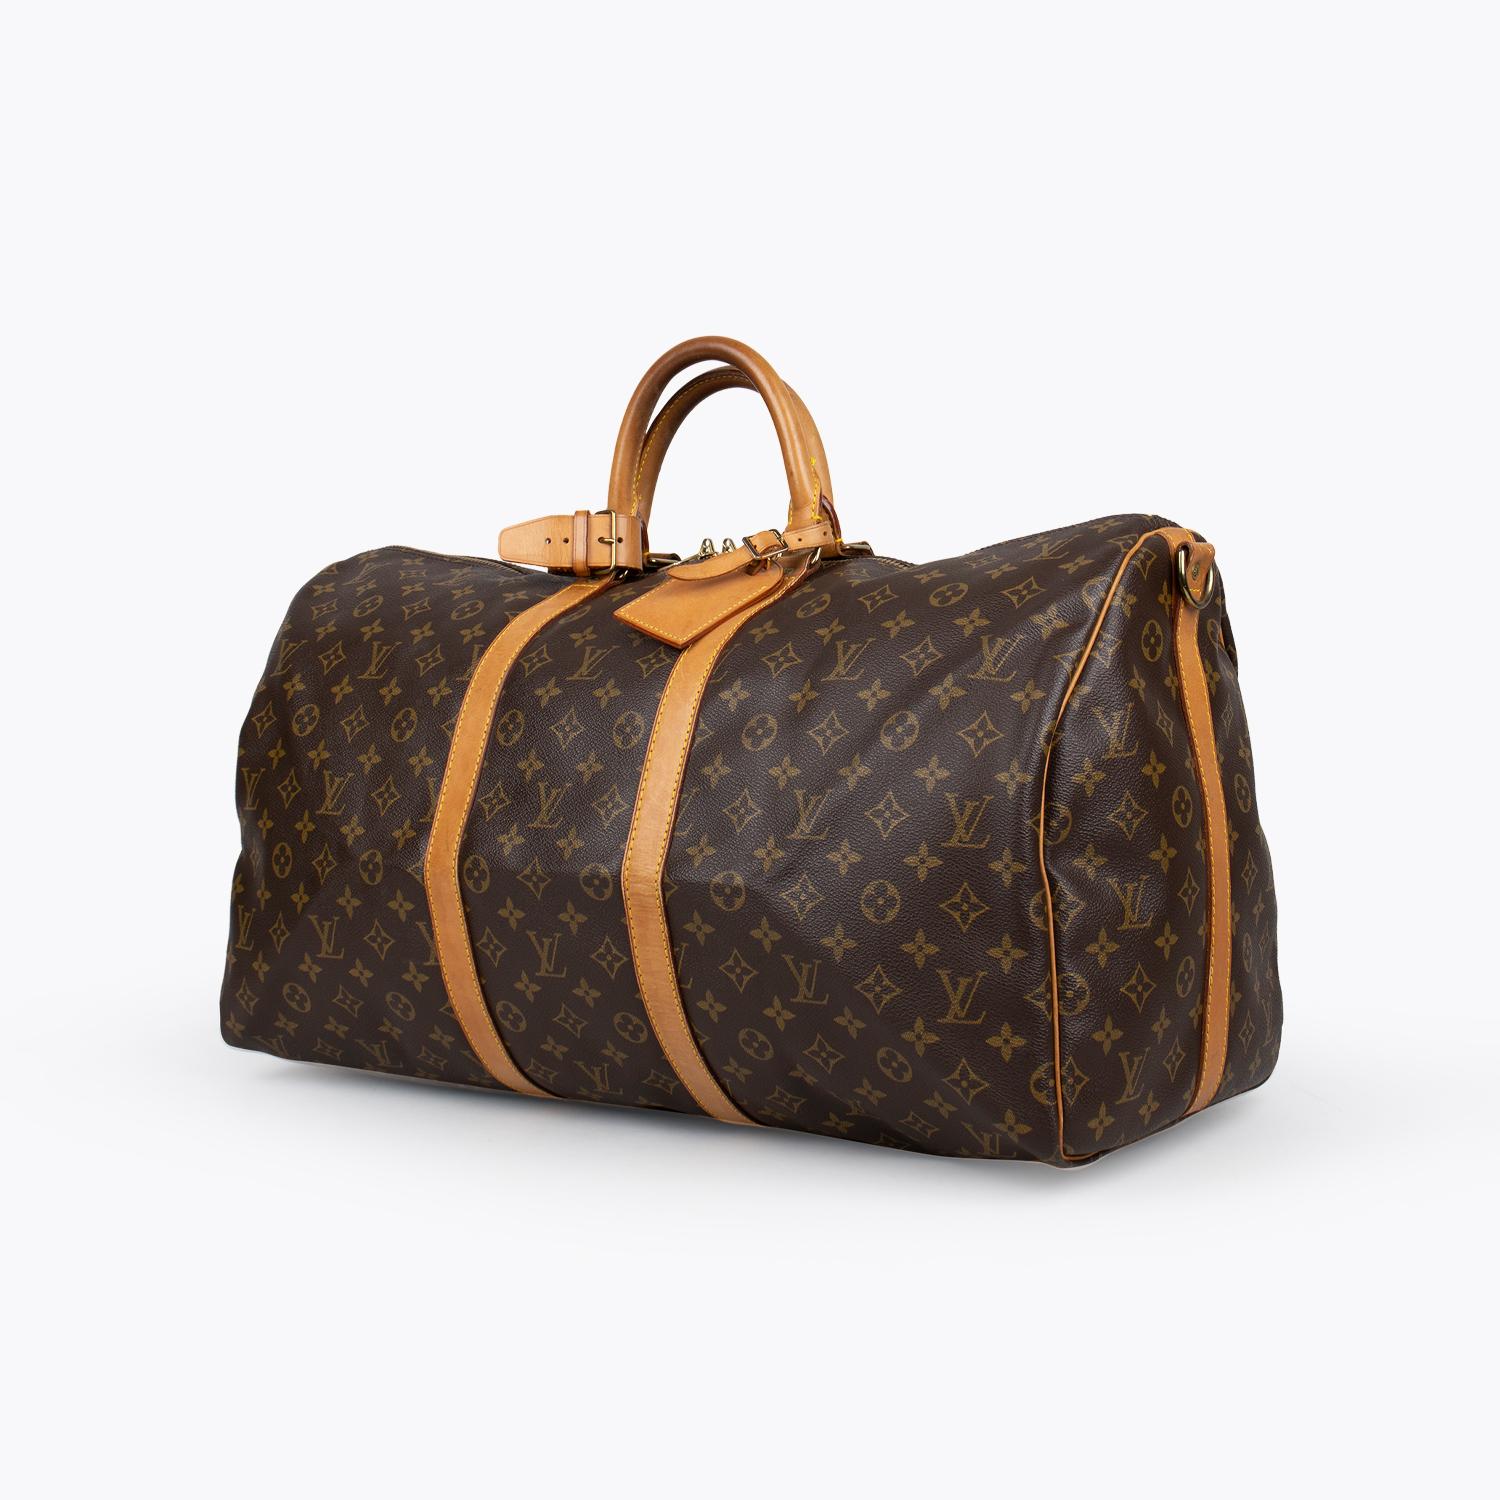 Brown and tan monogram coated canvas Louis Vuitton Keepall Bandoulière 55 with

- Brass hardware
- Tan vachetta leather trim
- Dual rolled top handles
- Tonal canvas lining and two-way zip closure at top

Overall Preloved Condition: Good
Exterior